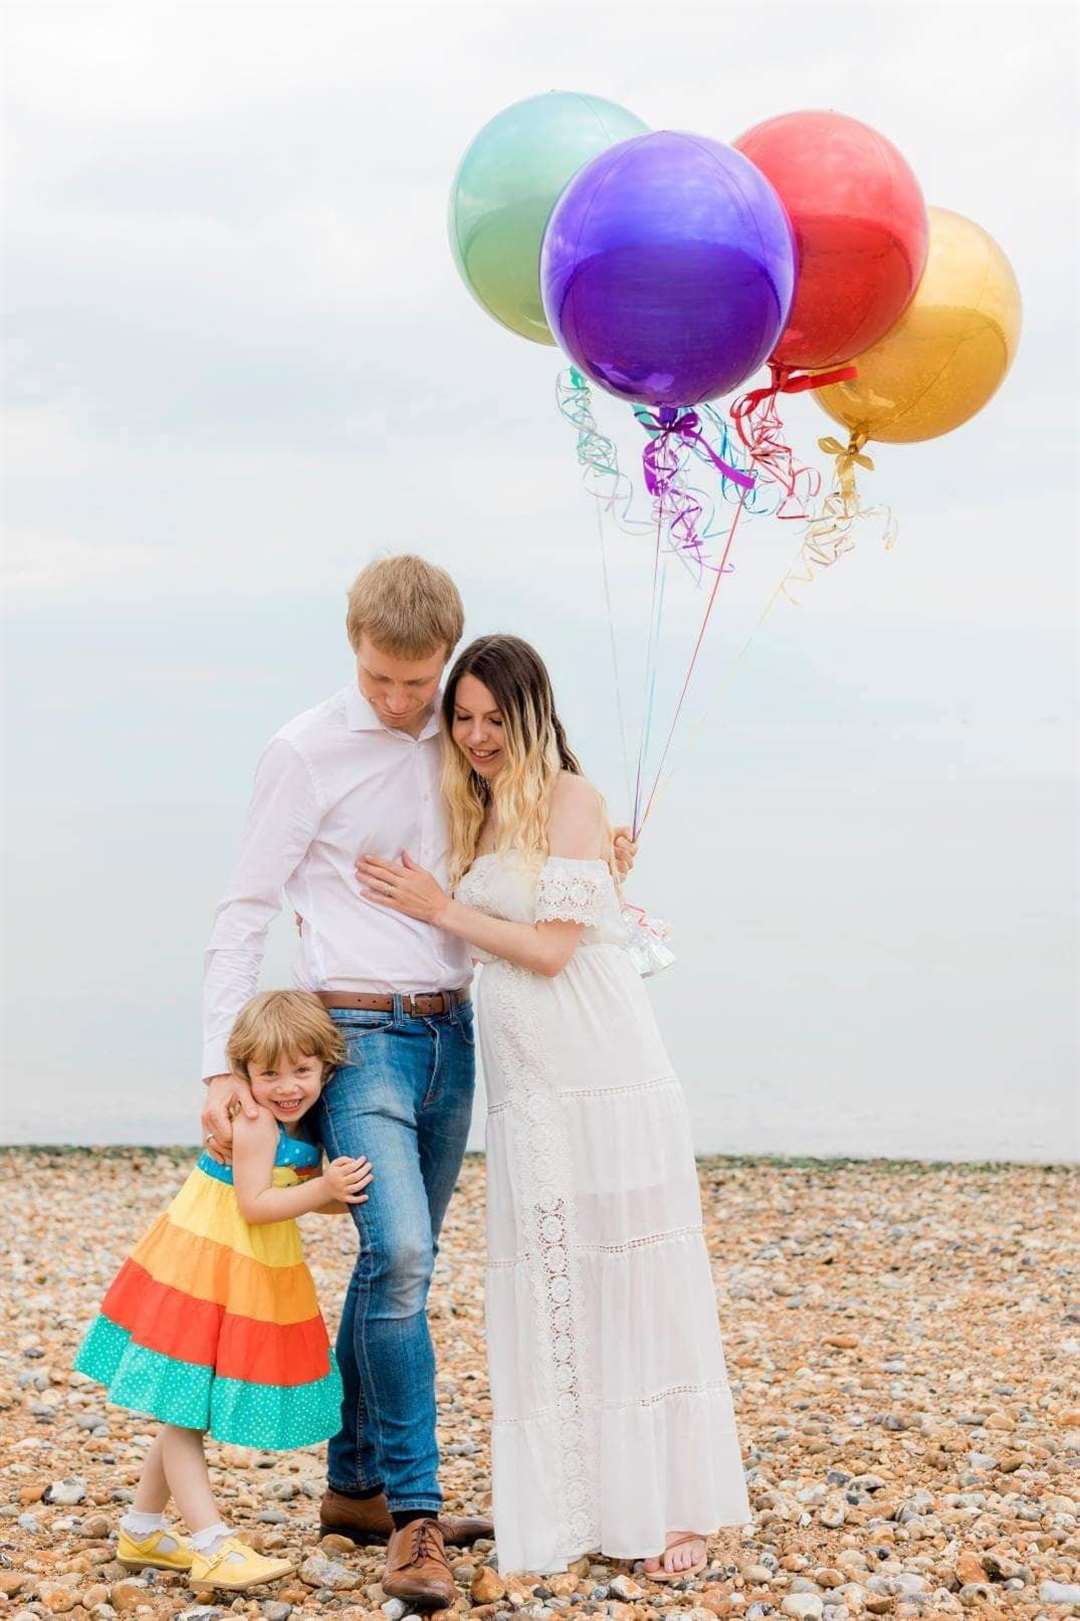 Laura Chesmer with her husband Dave and daughter Autumn in their a pregnancy announcement photograph. Picture: Robert Marriott